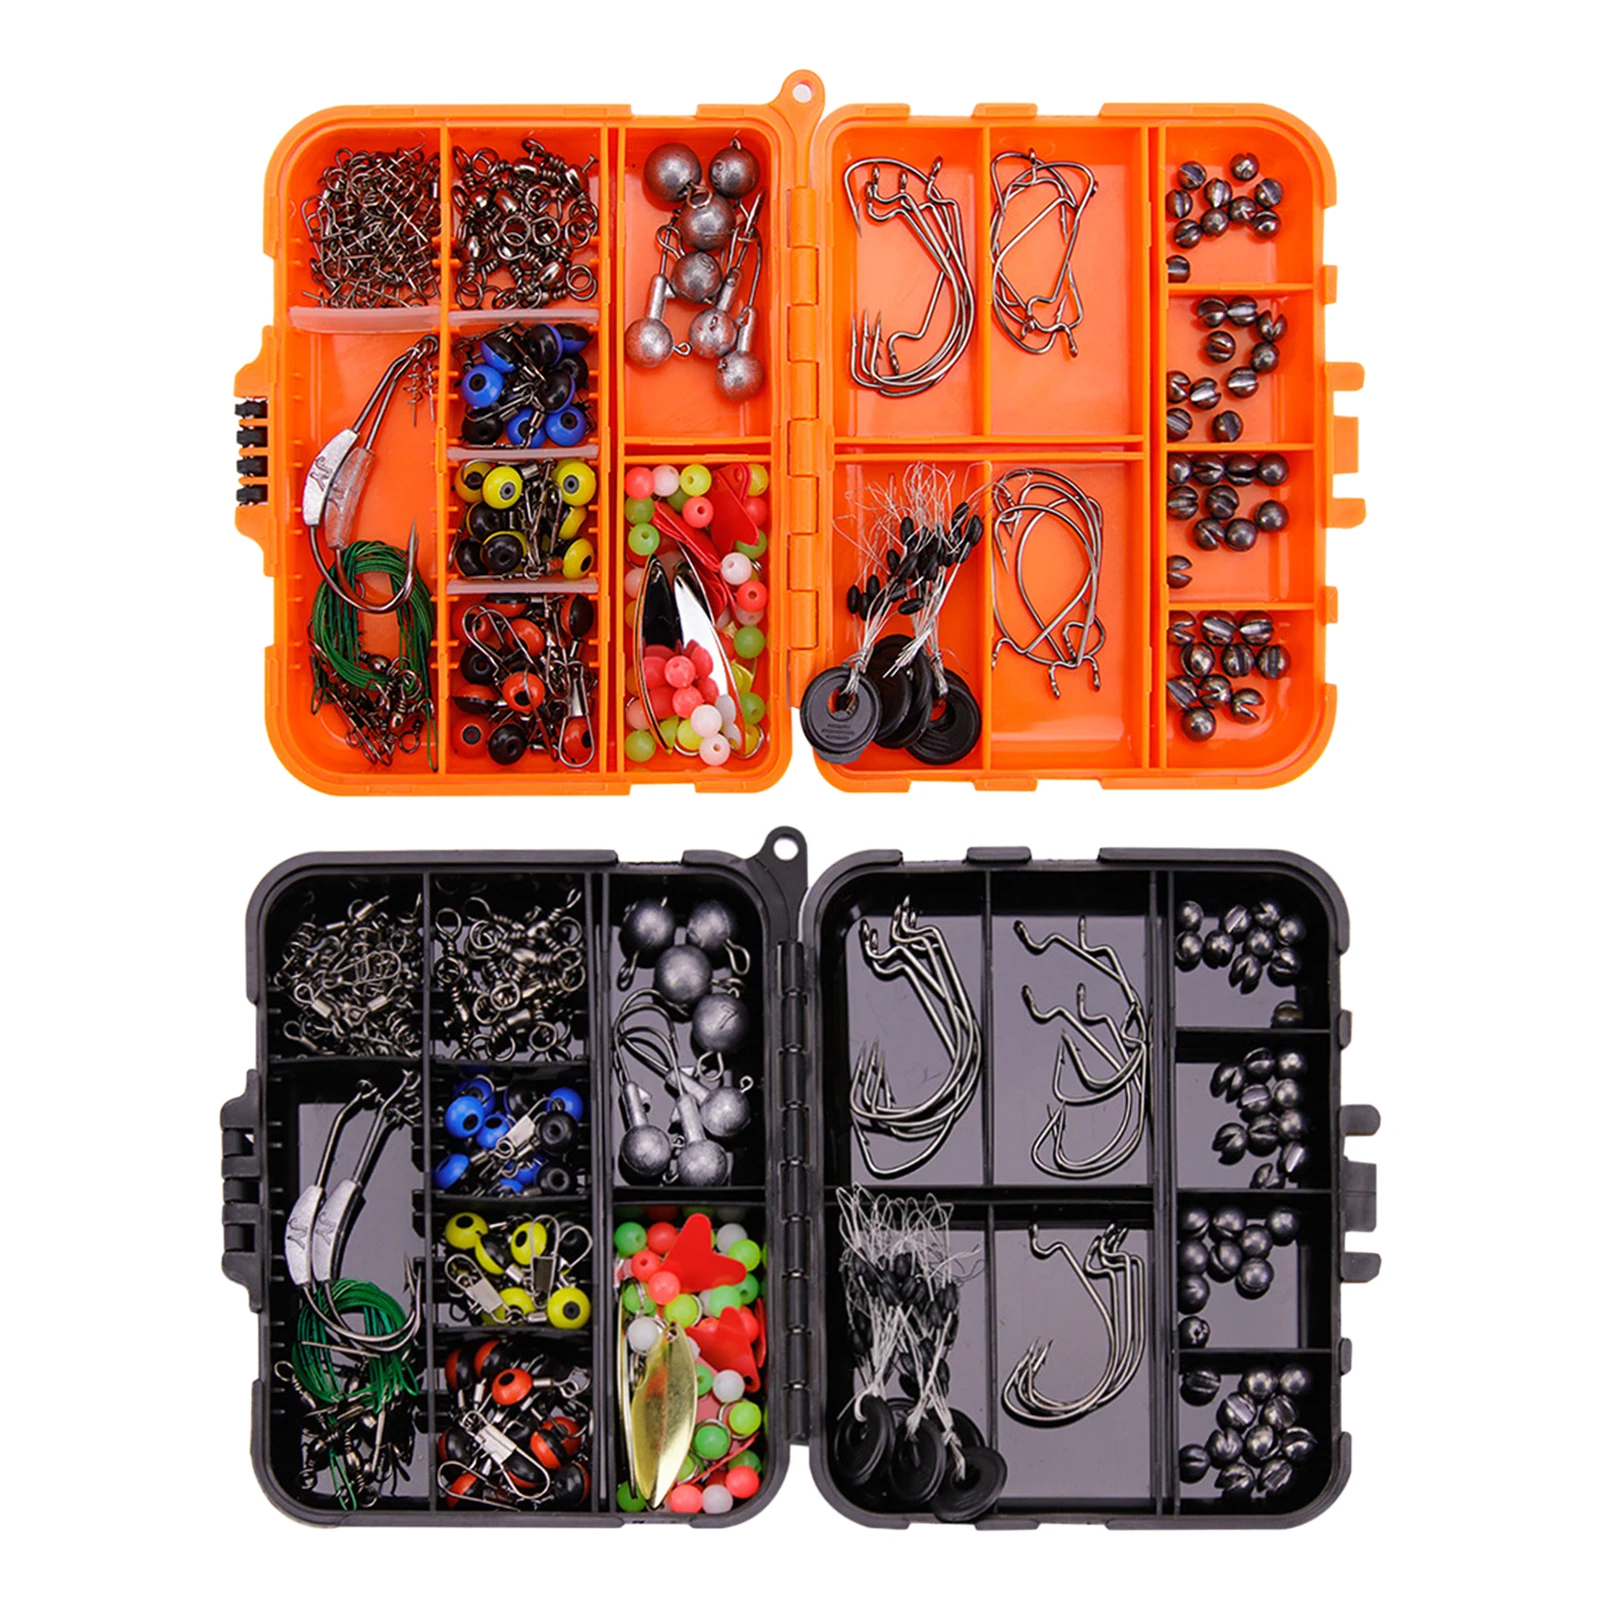 Fishing Tackle Accessories Kit 213pcs with Tackle Fishing Sinkers Equipment